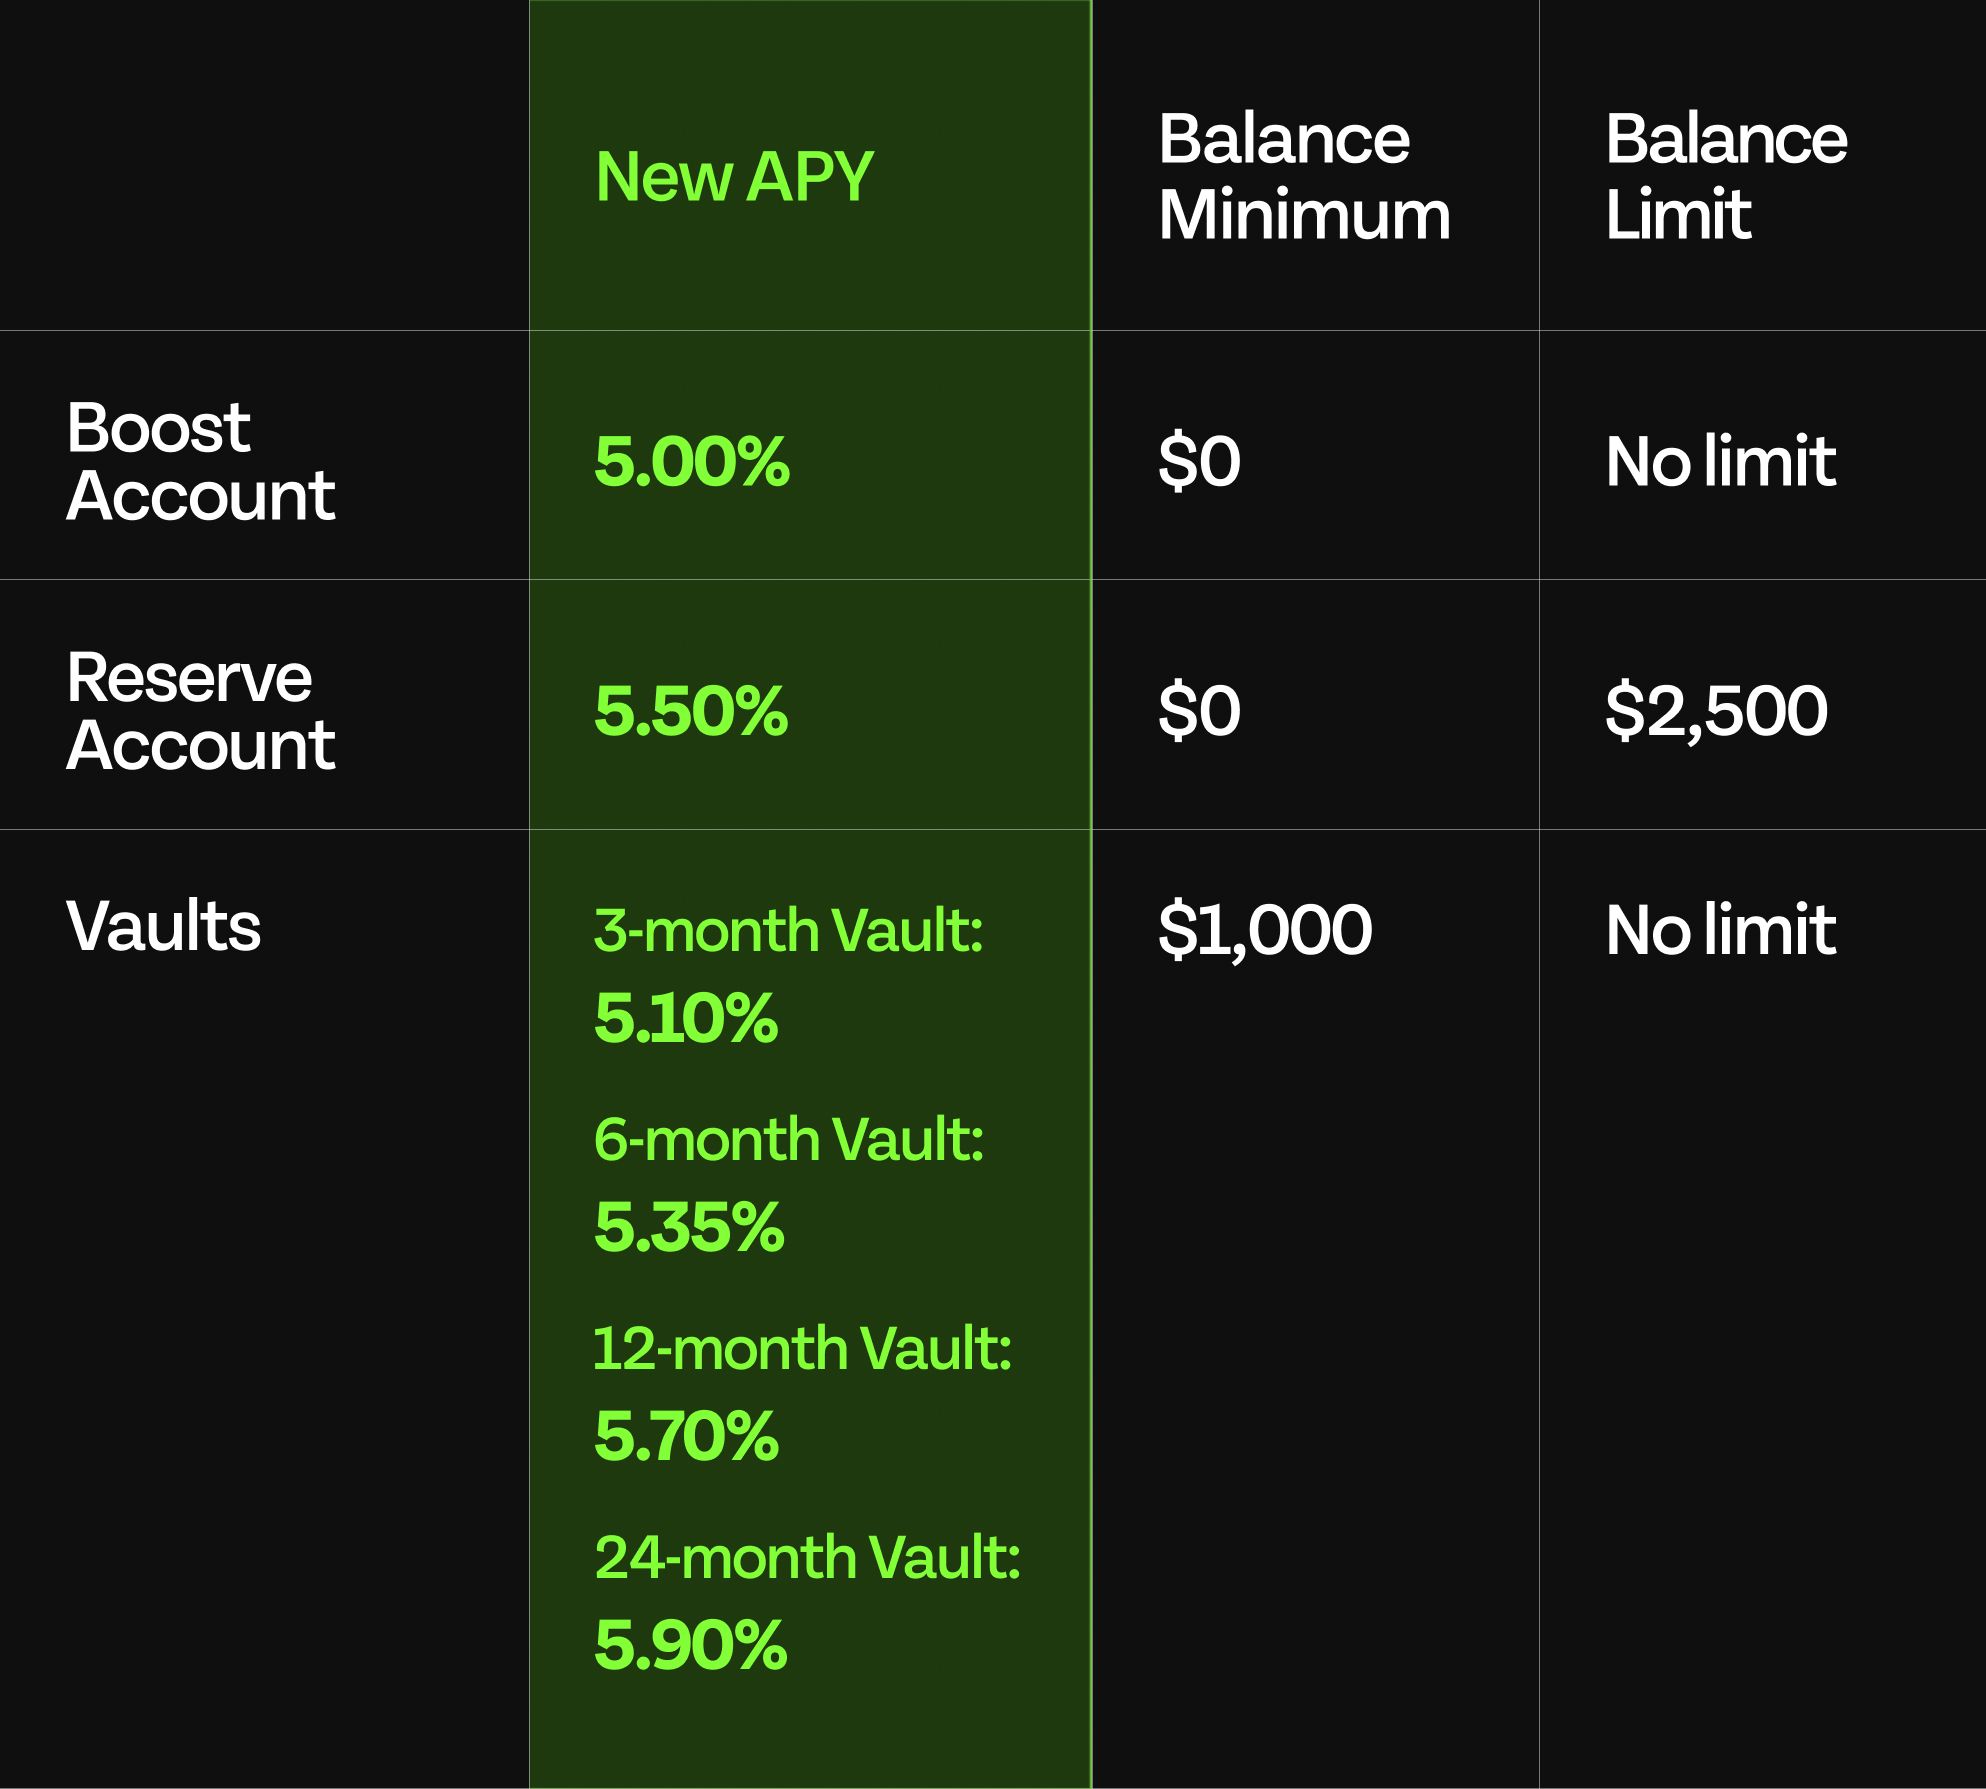 Table showing newly raised Tellus rates. Now, Boost earns 5.00% APY and a 3-month Vault earns 5.10% APY